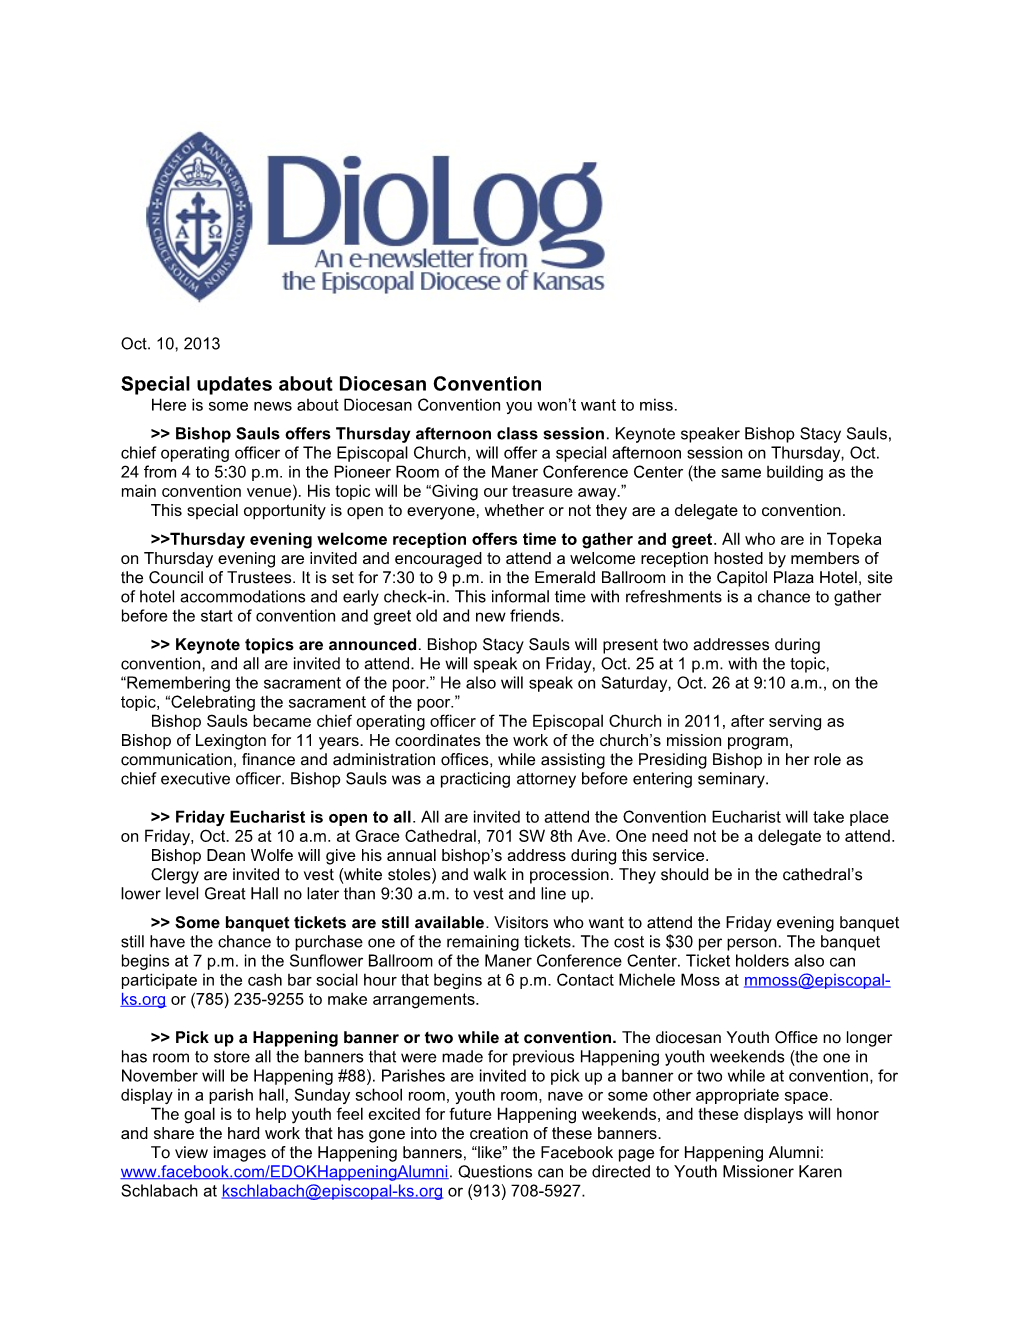 Special Updates About Diocesan Convention